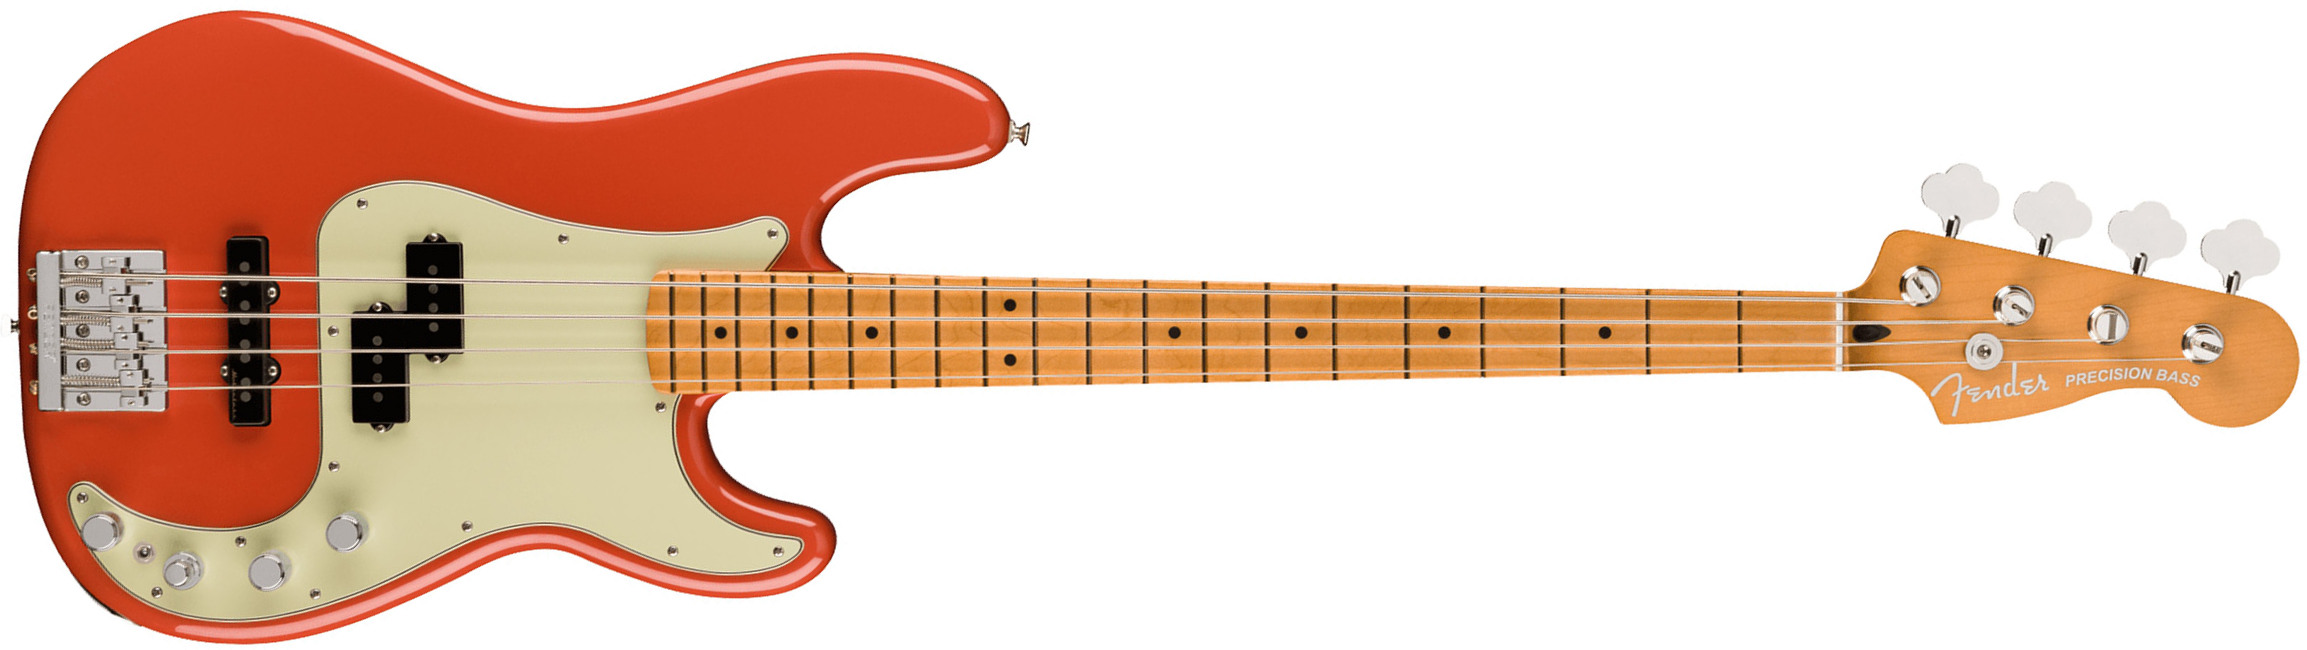 Fender Precision Bass Player Plus 2023 Mex Active Mn - Fiesta Red - Basse Électrique Solid Body - Main picture